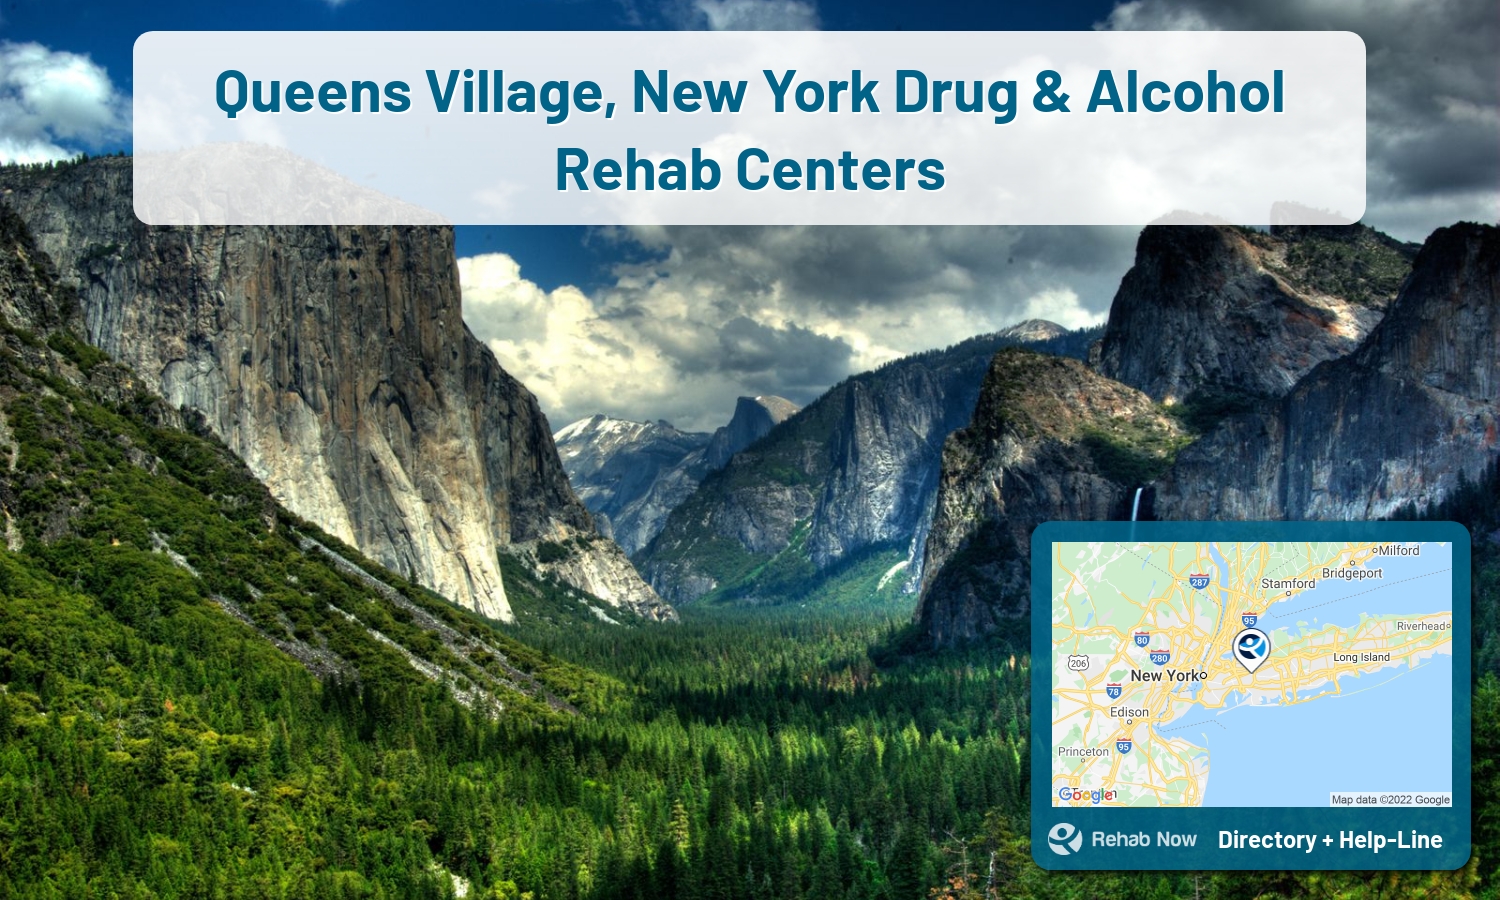 List of alcohol and drug treatment centers near you in Queens Village, New York. Research certifications, programs, methods, pricing, and more.